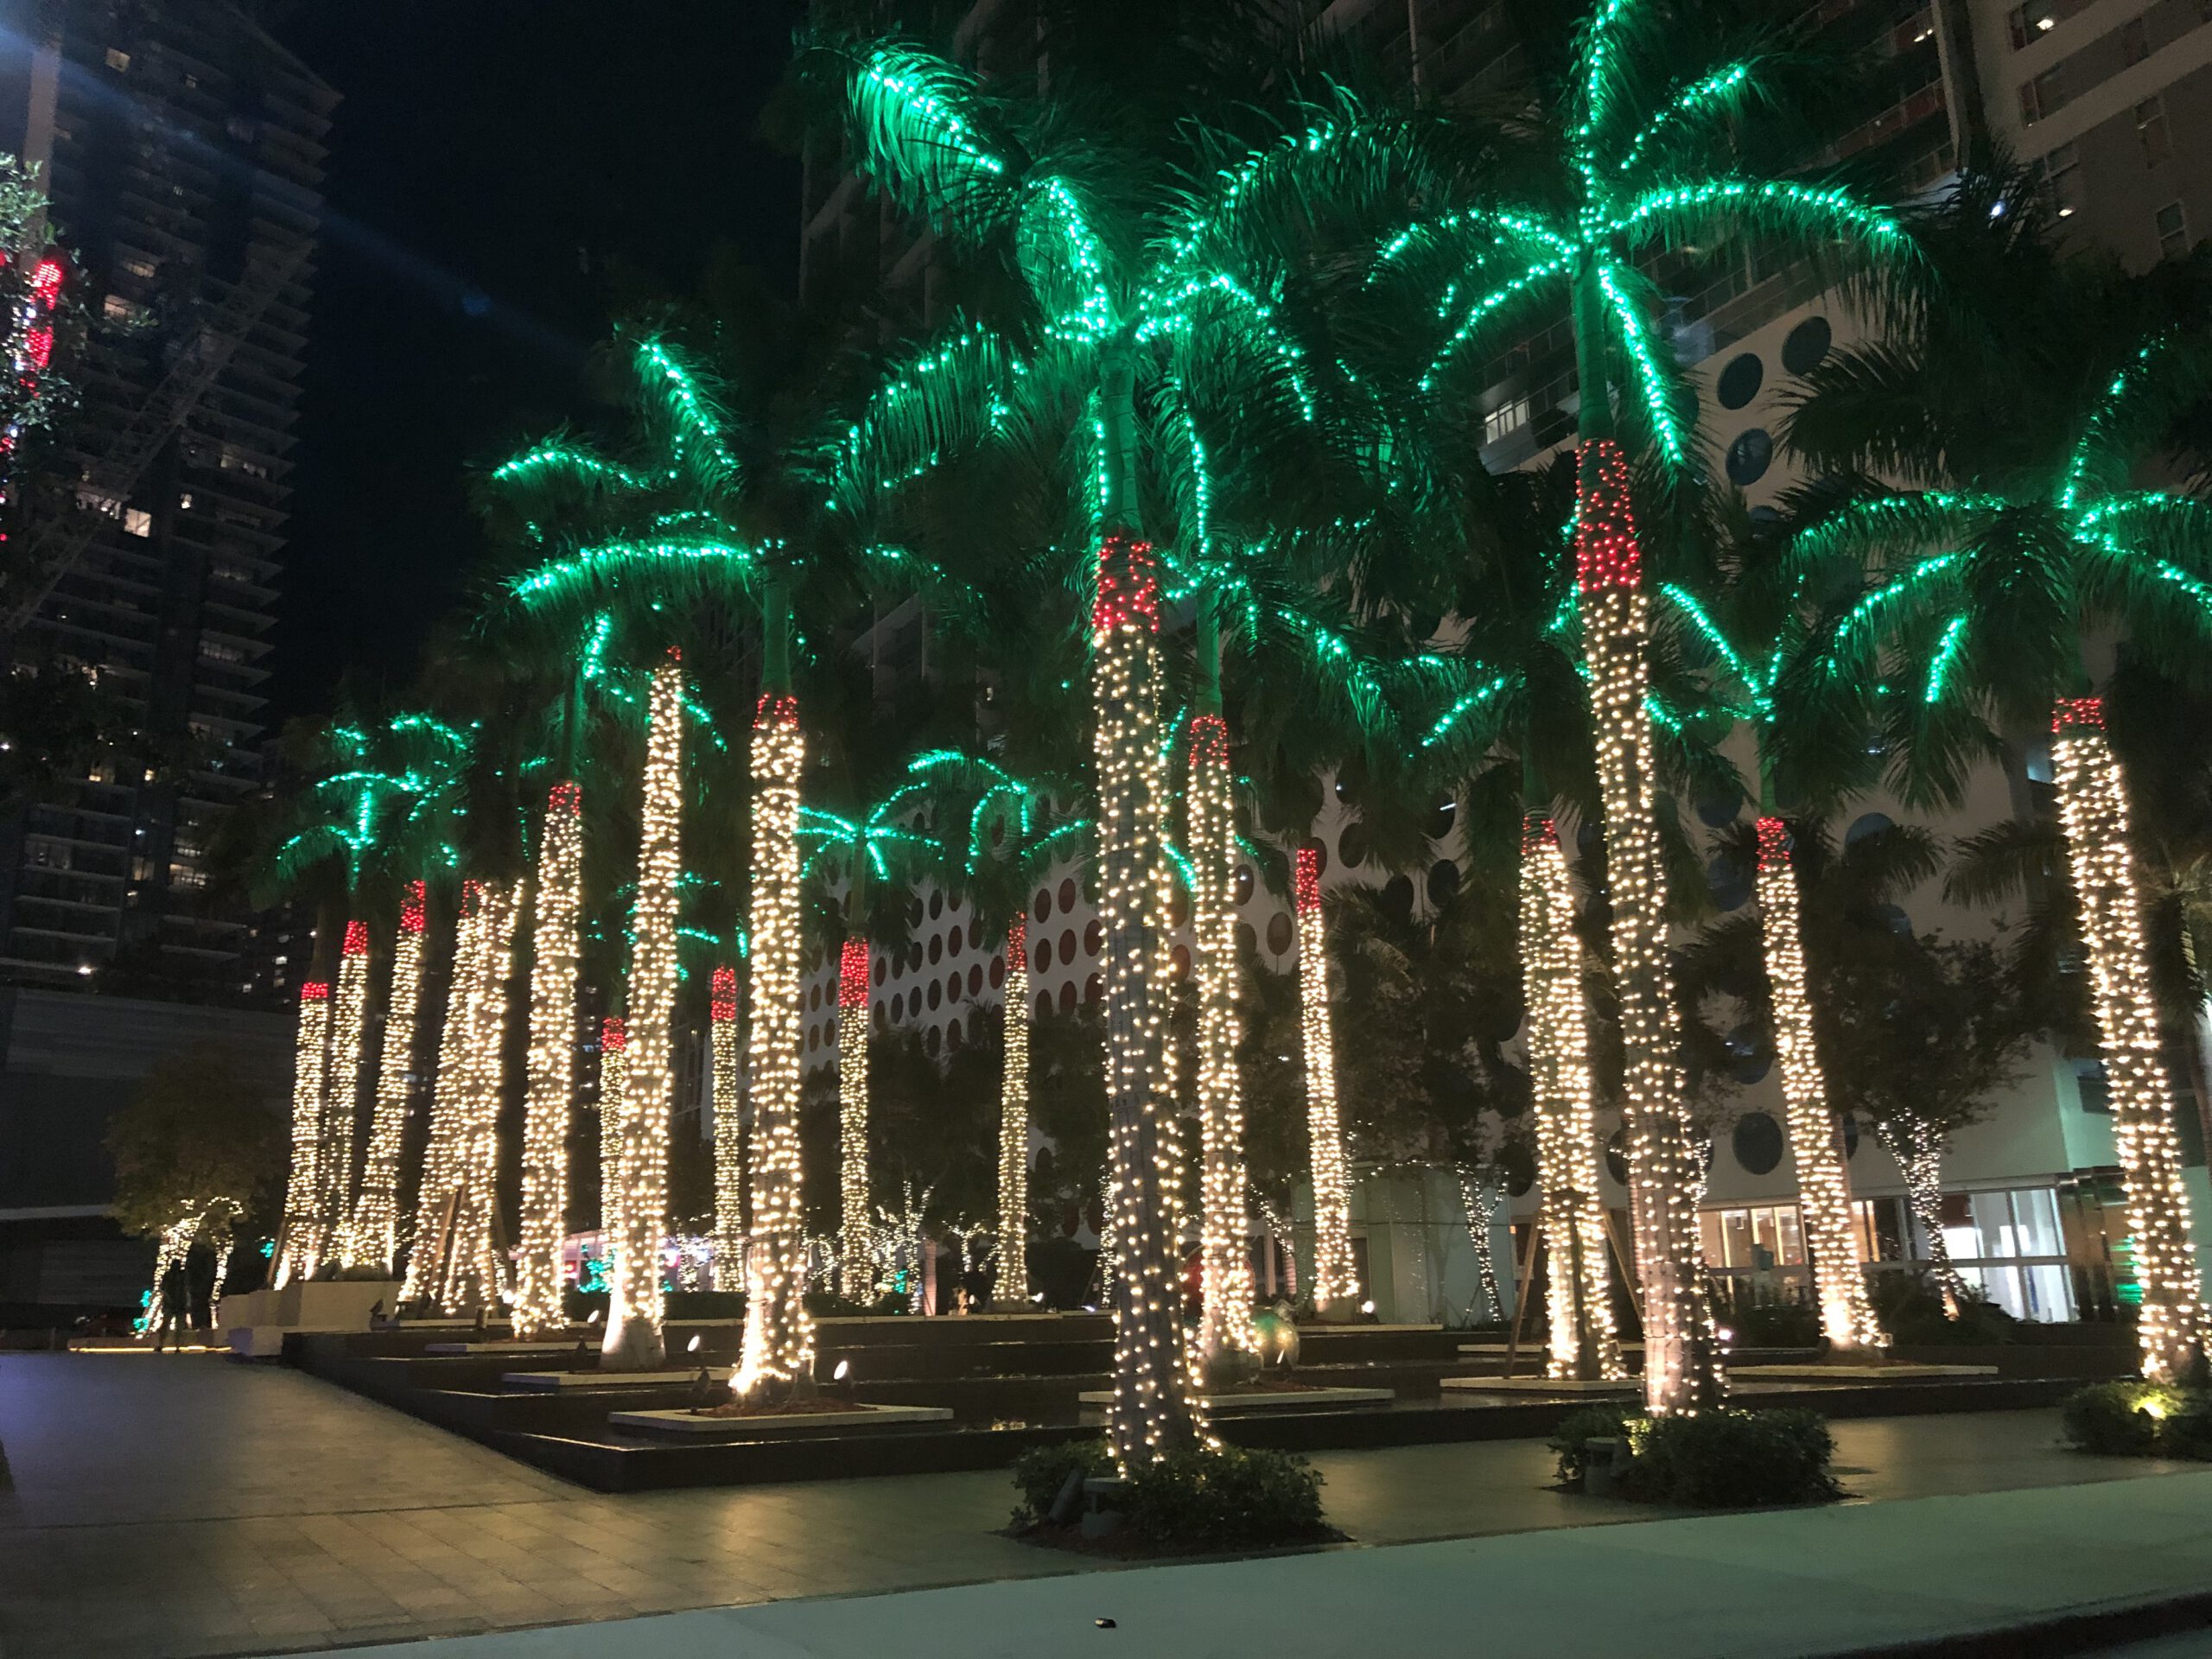 Palm Trees in Downtown, Miami decorated with Christmas lights, green lights on the palm fronds and red around the top of the trunk and white from the red part down to the roots. Very festive!